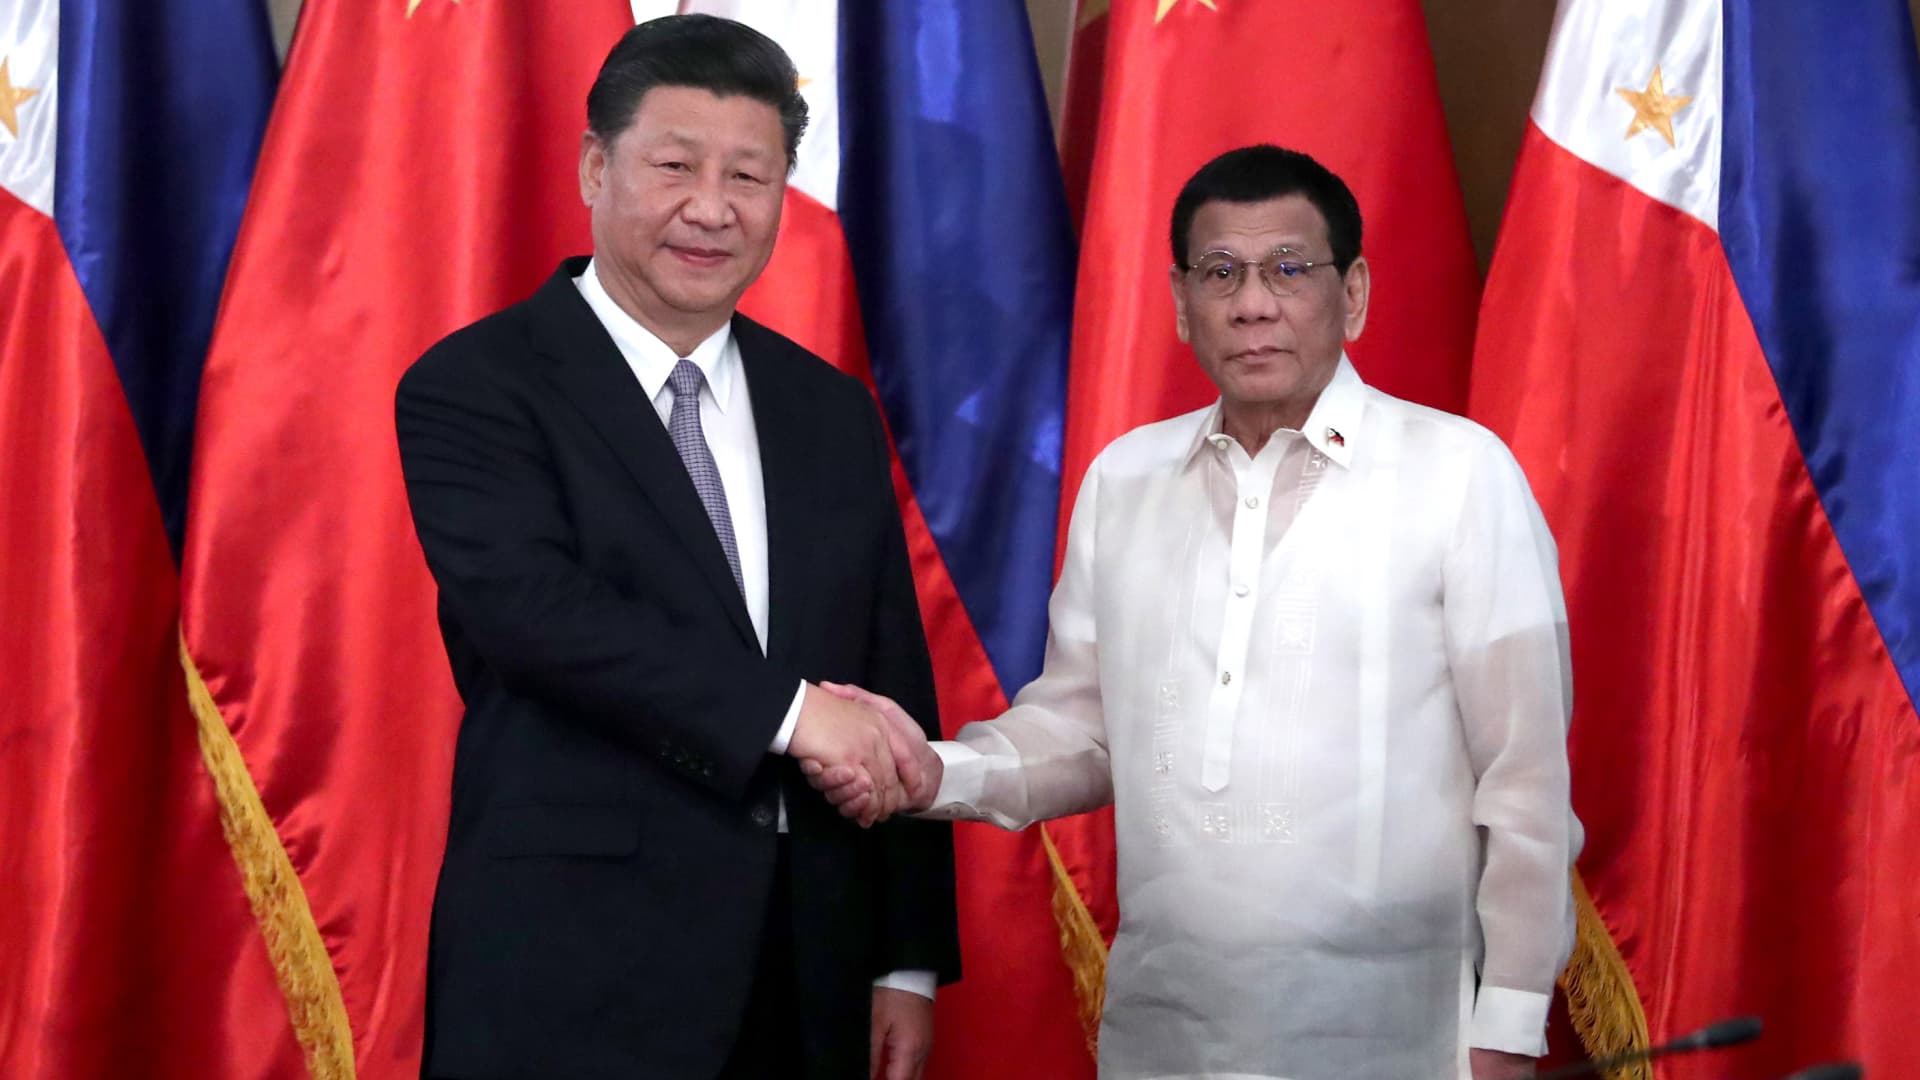 The Philippines’ pivot toward China could change when Duterte steps down as president